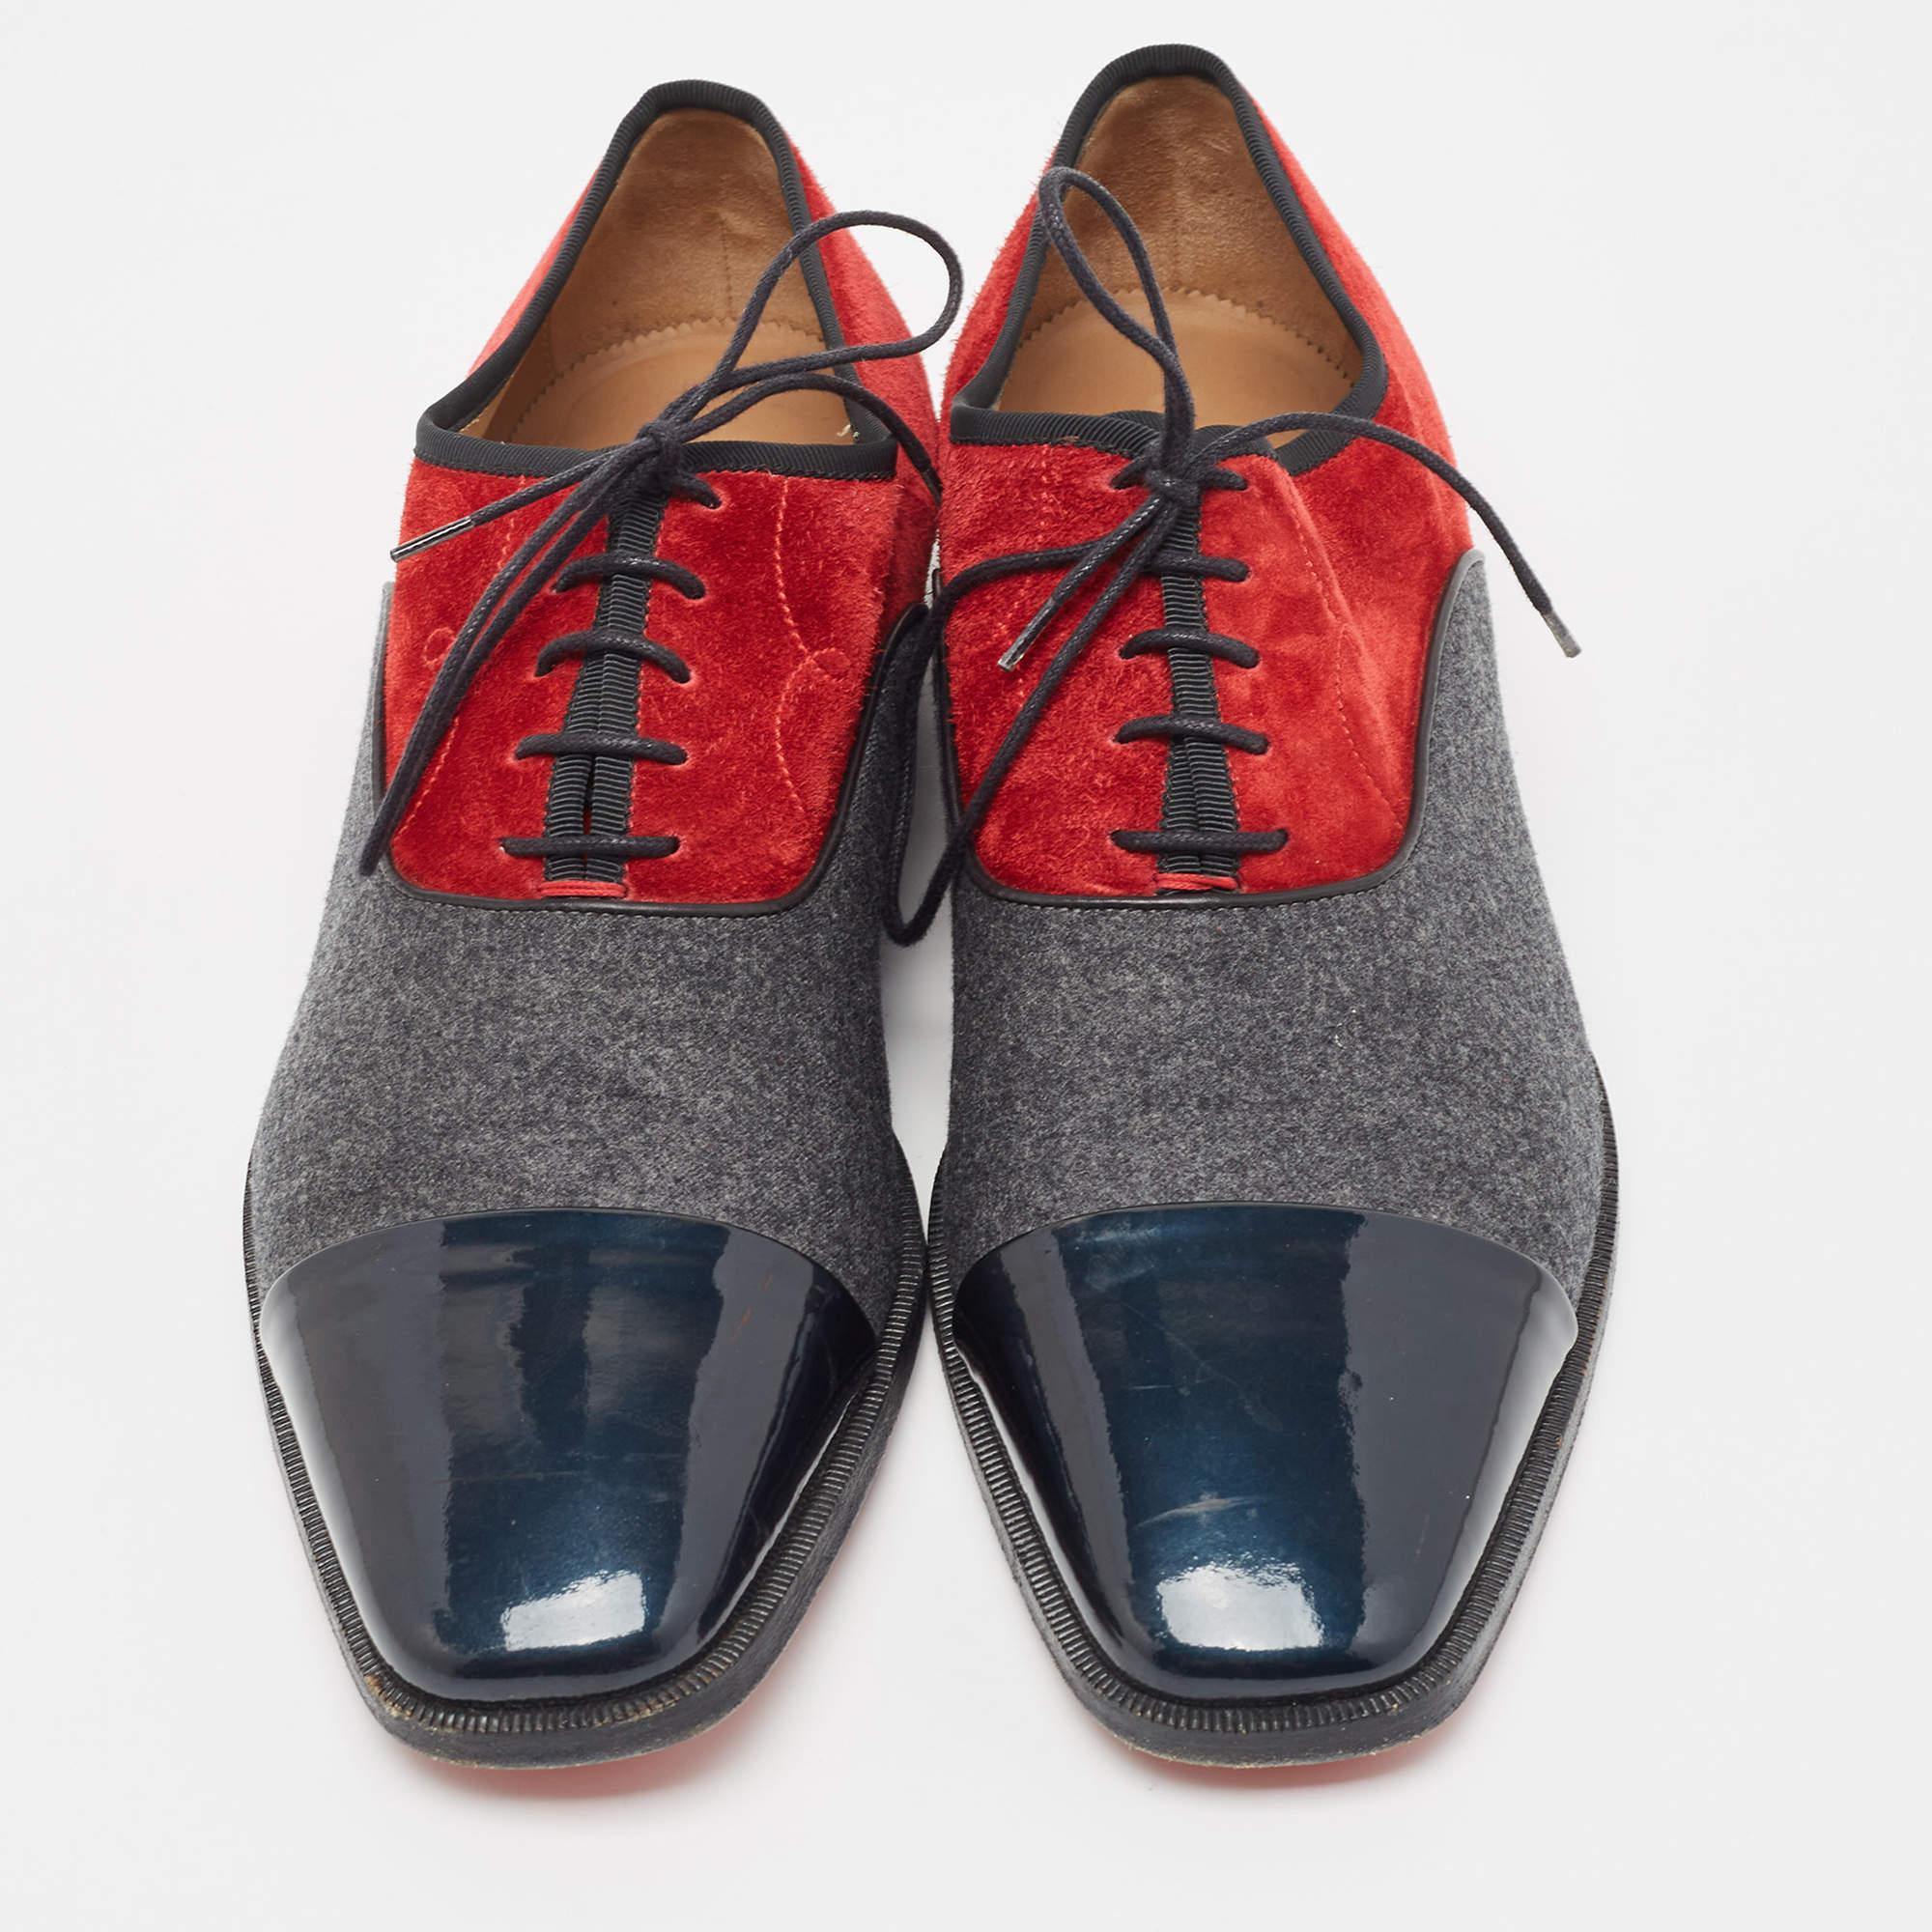 These oxfords are designed from the finest material featuring an elegant look, sturdy soles, and lace-ups on the vamps. Team these shoes with tailored pants and a blazer for a smart formal look.

